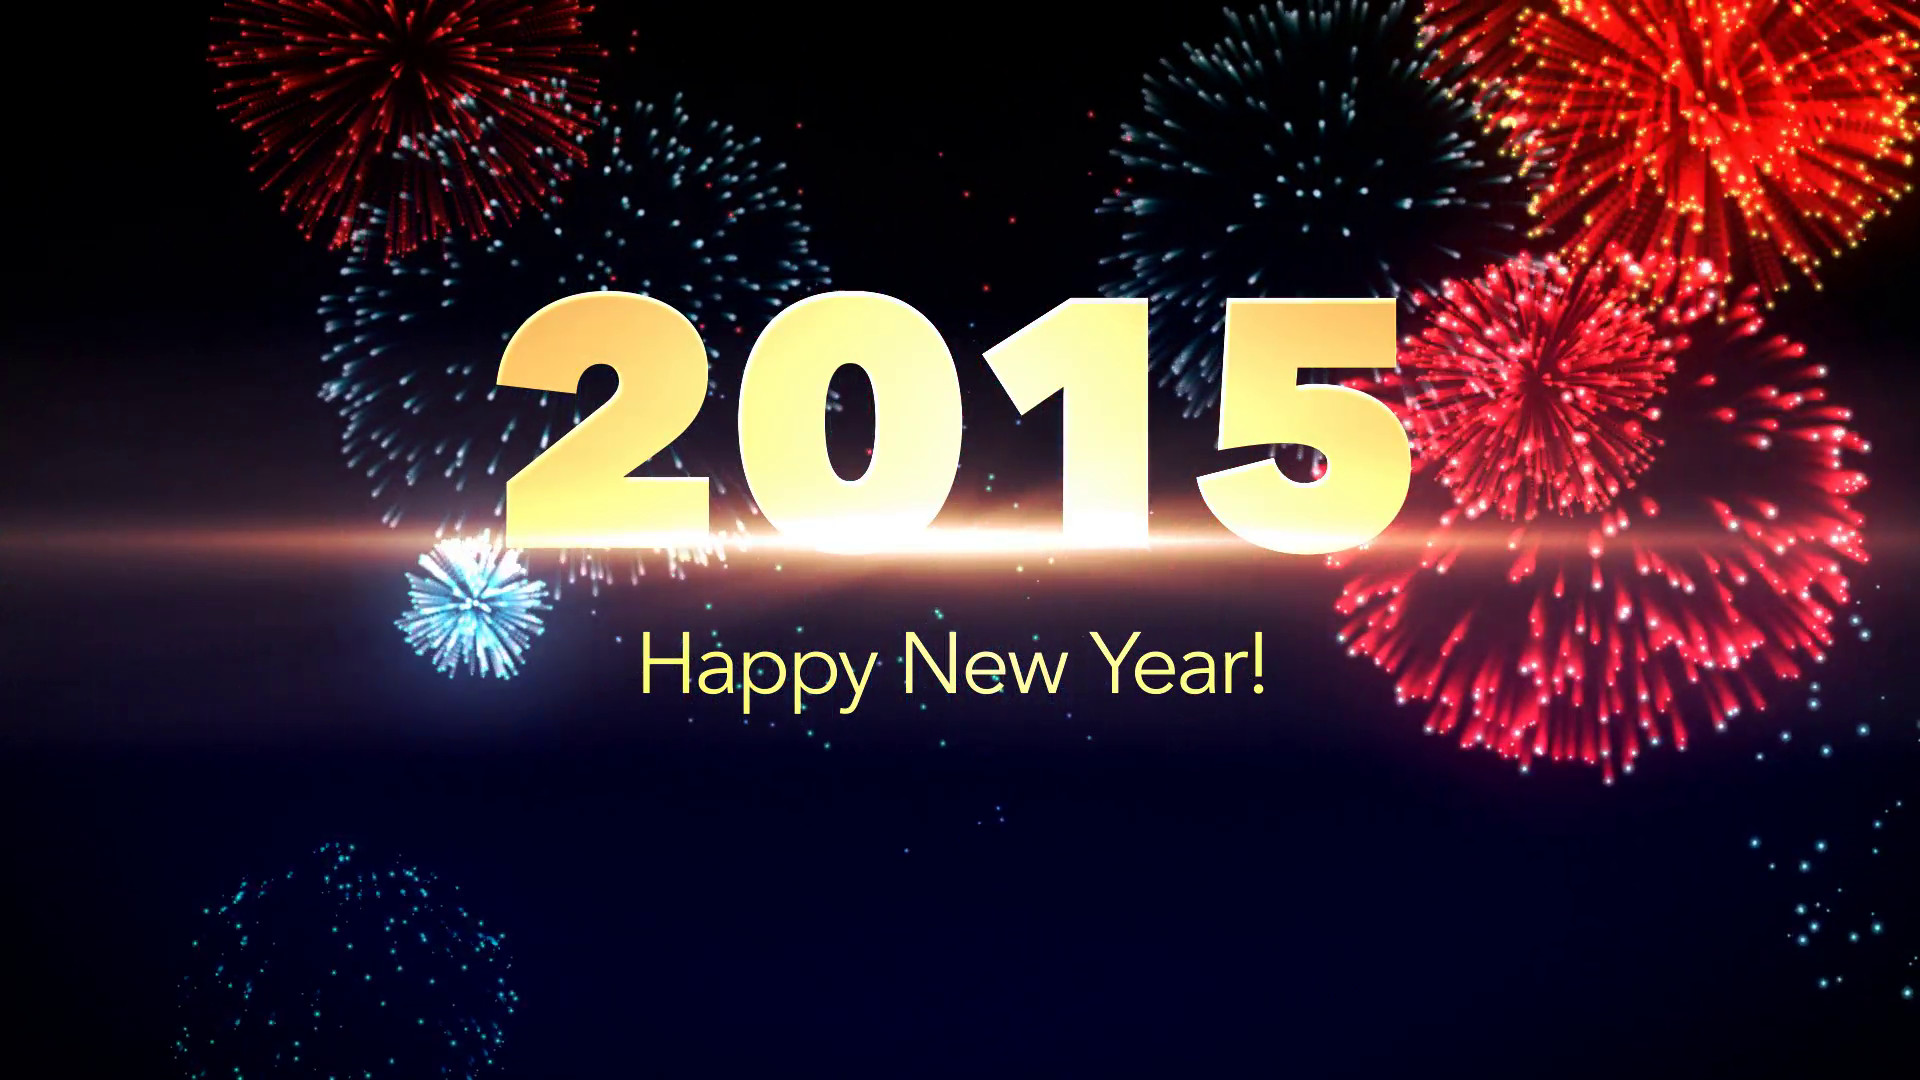 1920x1080 Subscription Library Happy New Year 2015 Background with Fireworks